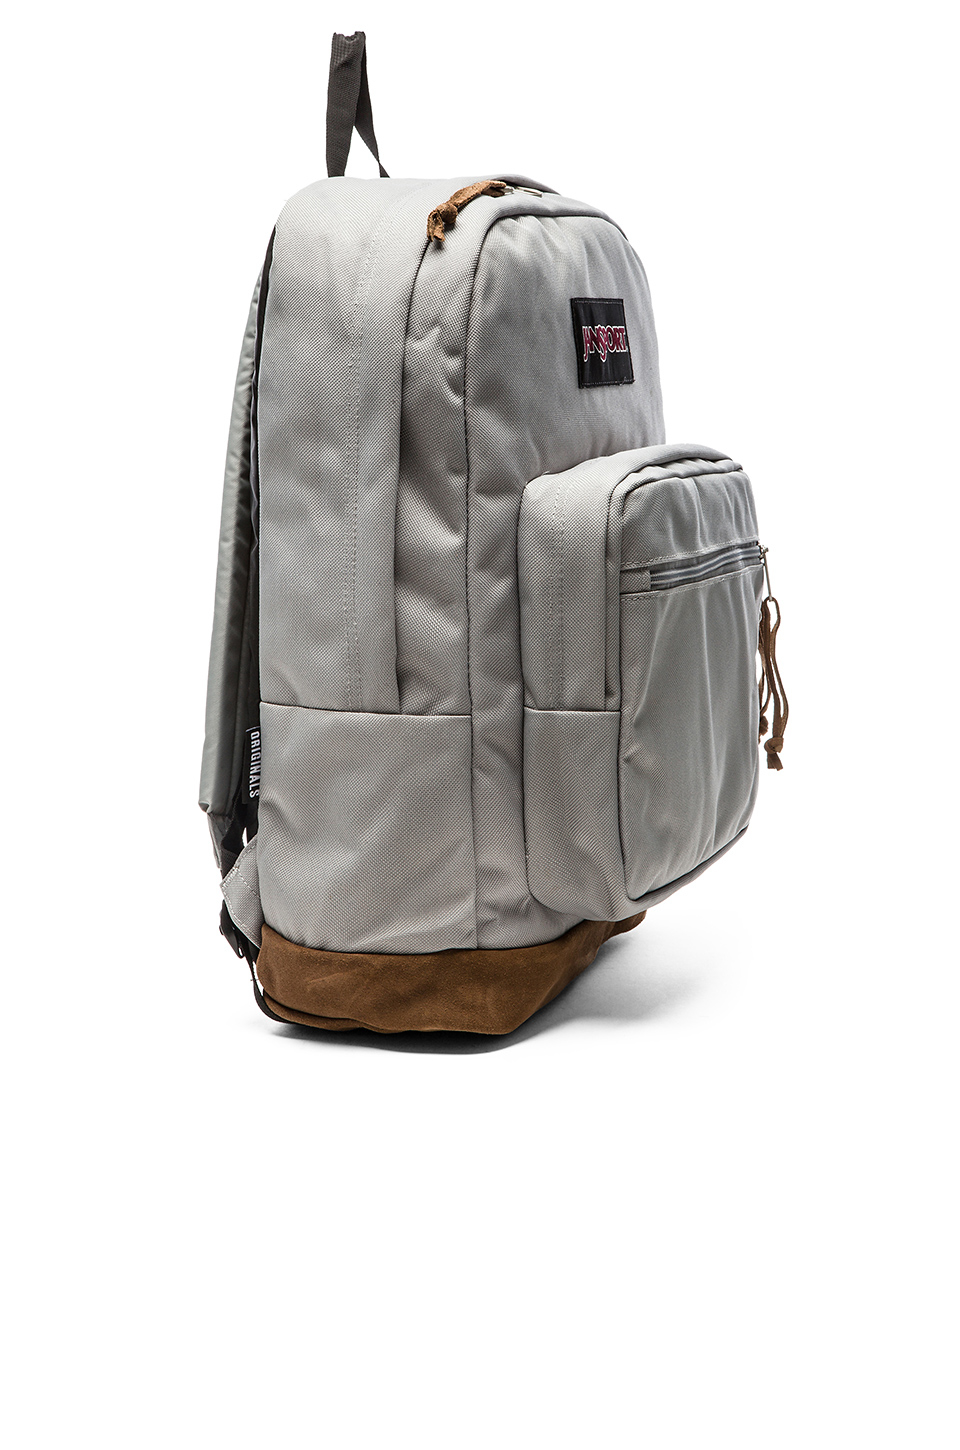 Lyst - Jansport Right Pack in Gray